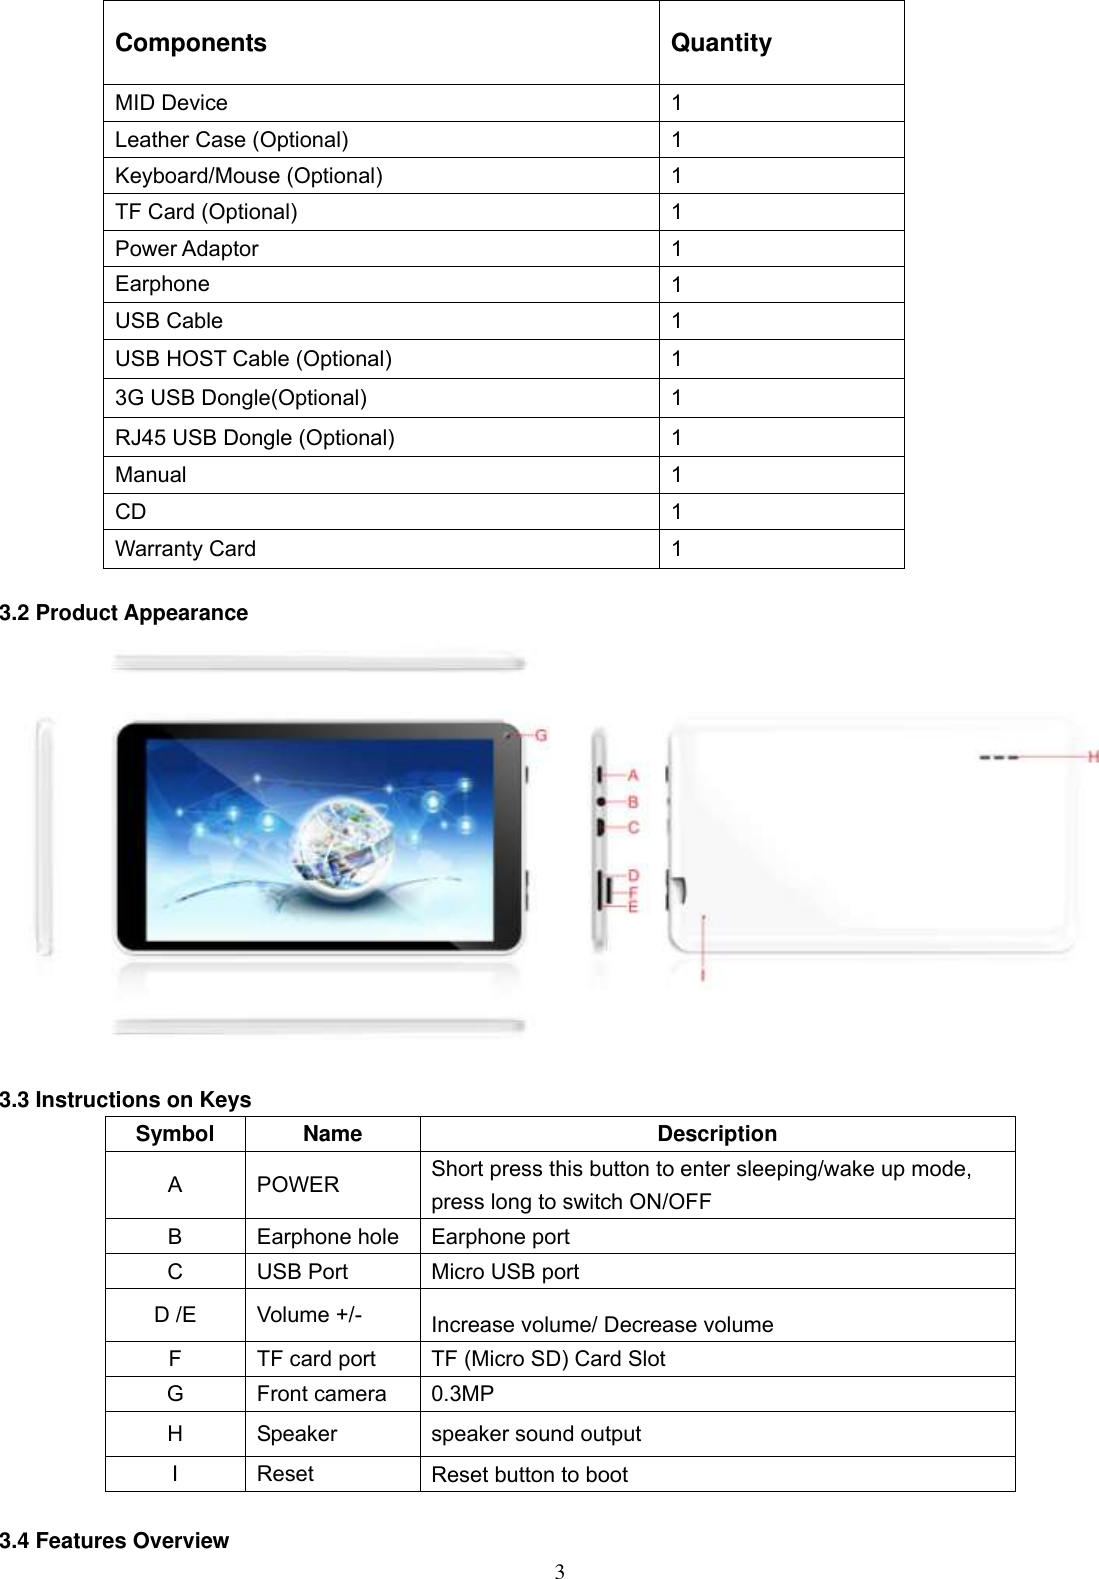  3                     3.2 Product Appearance  3.3 Instructions on Keys Symbol Name Description A POWER     Short press this button to enter sleeping/wake up mode, press long to switch ON/OFF     B Earphone hole Earphone port   C USB Port   Micro USB port D /E Volume +/-   Increase volume/ Decrease volume F TF card port TF (Micro SD) Card Slot G Front camera   0.3MP H Speaker speaker sound output I Reset Reset button to boot  3.4 Features Overview Components Quantity MID Device 1 Leather Case (Optional) 1 Keyboard/Mouse (Optional) 1 TF Card (Optional) 1 Power Adaptor 1 Earphone 1 USB Cable 1 USB HOST Cable (Optional) 1 3G USB Dongle(Optional) 1 RJ45 USB Dongle (Optional) 1 Manual 1 CD 1 Warranty Card       1 